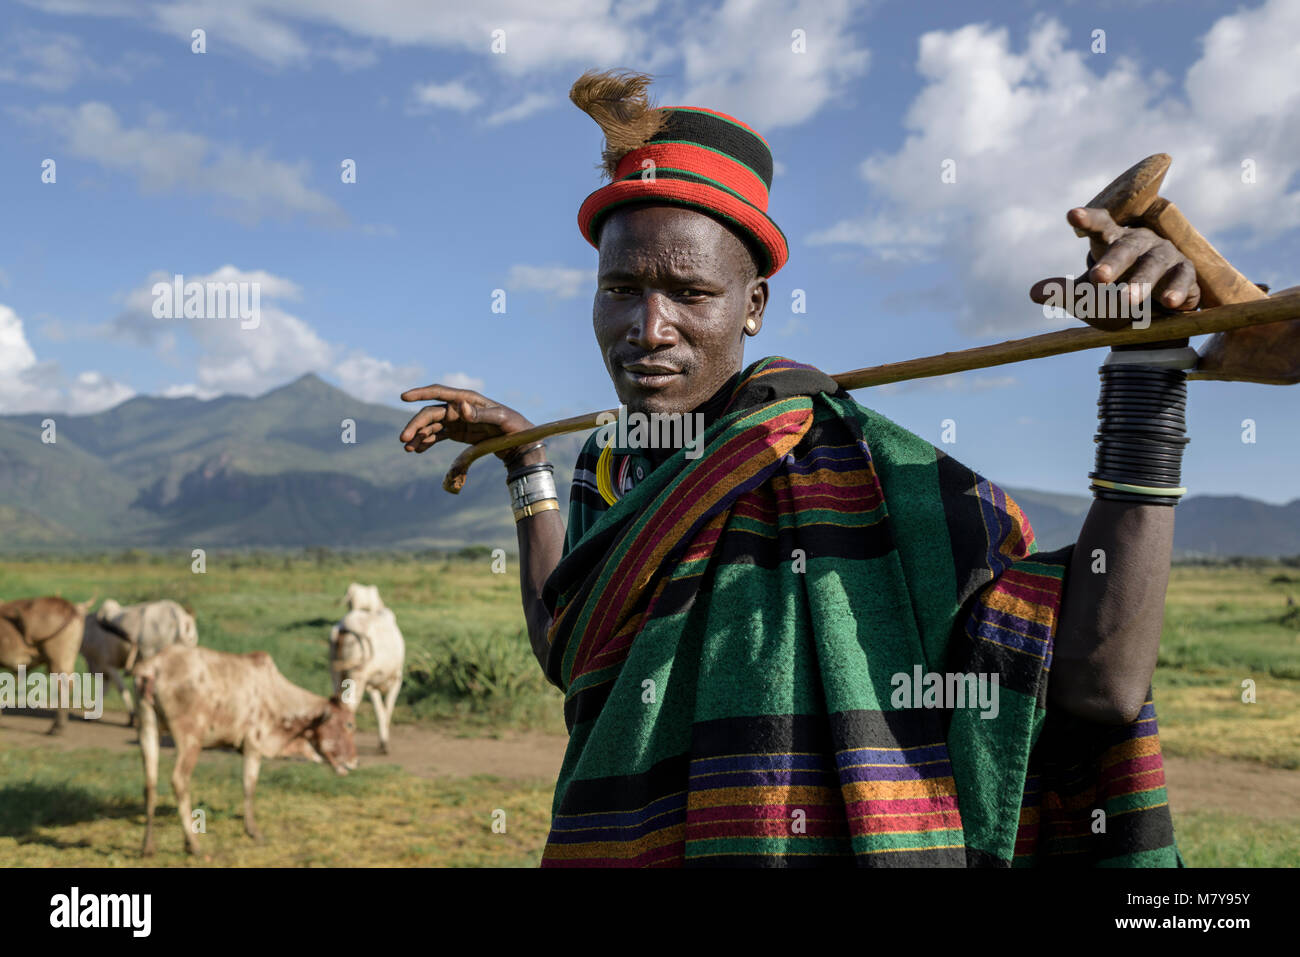 In the rural areas of North Eastern Uganda, the Karamajong tribe live a simple pastoralist life. When a saw this man with his herd of cows I thought h Stock Photo